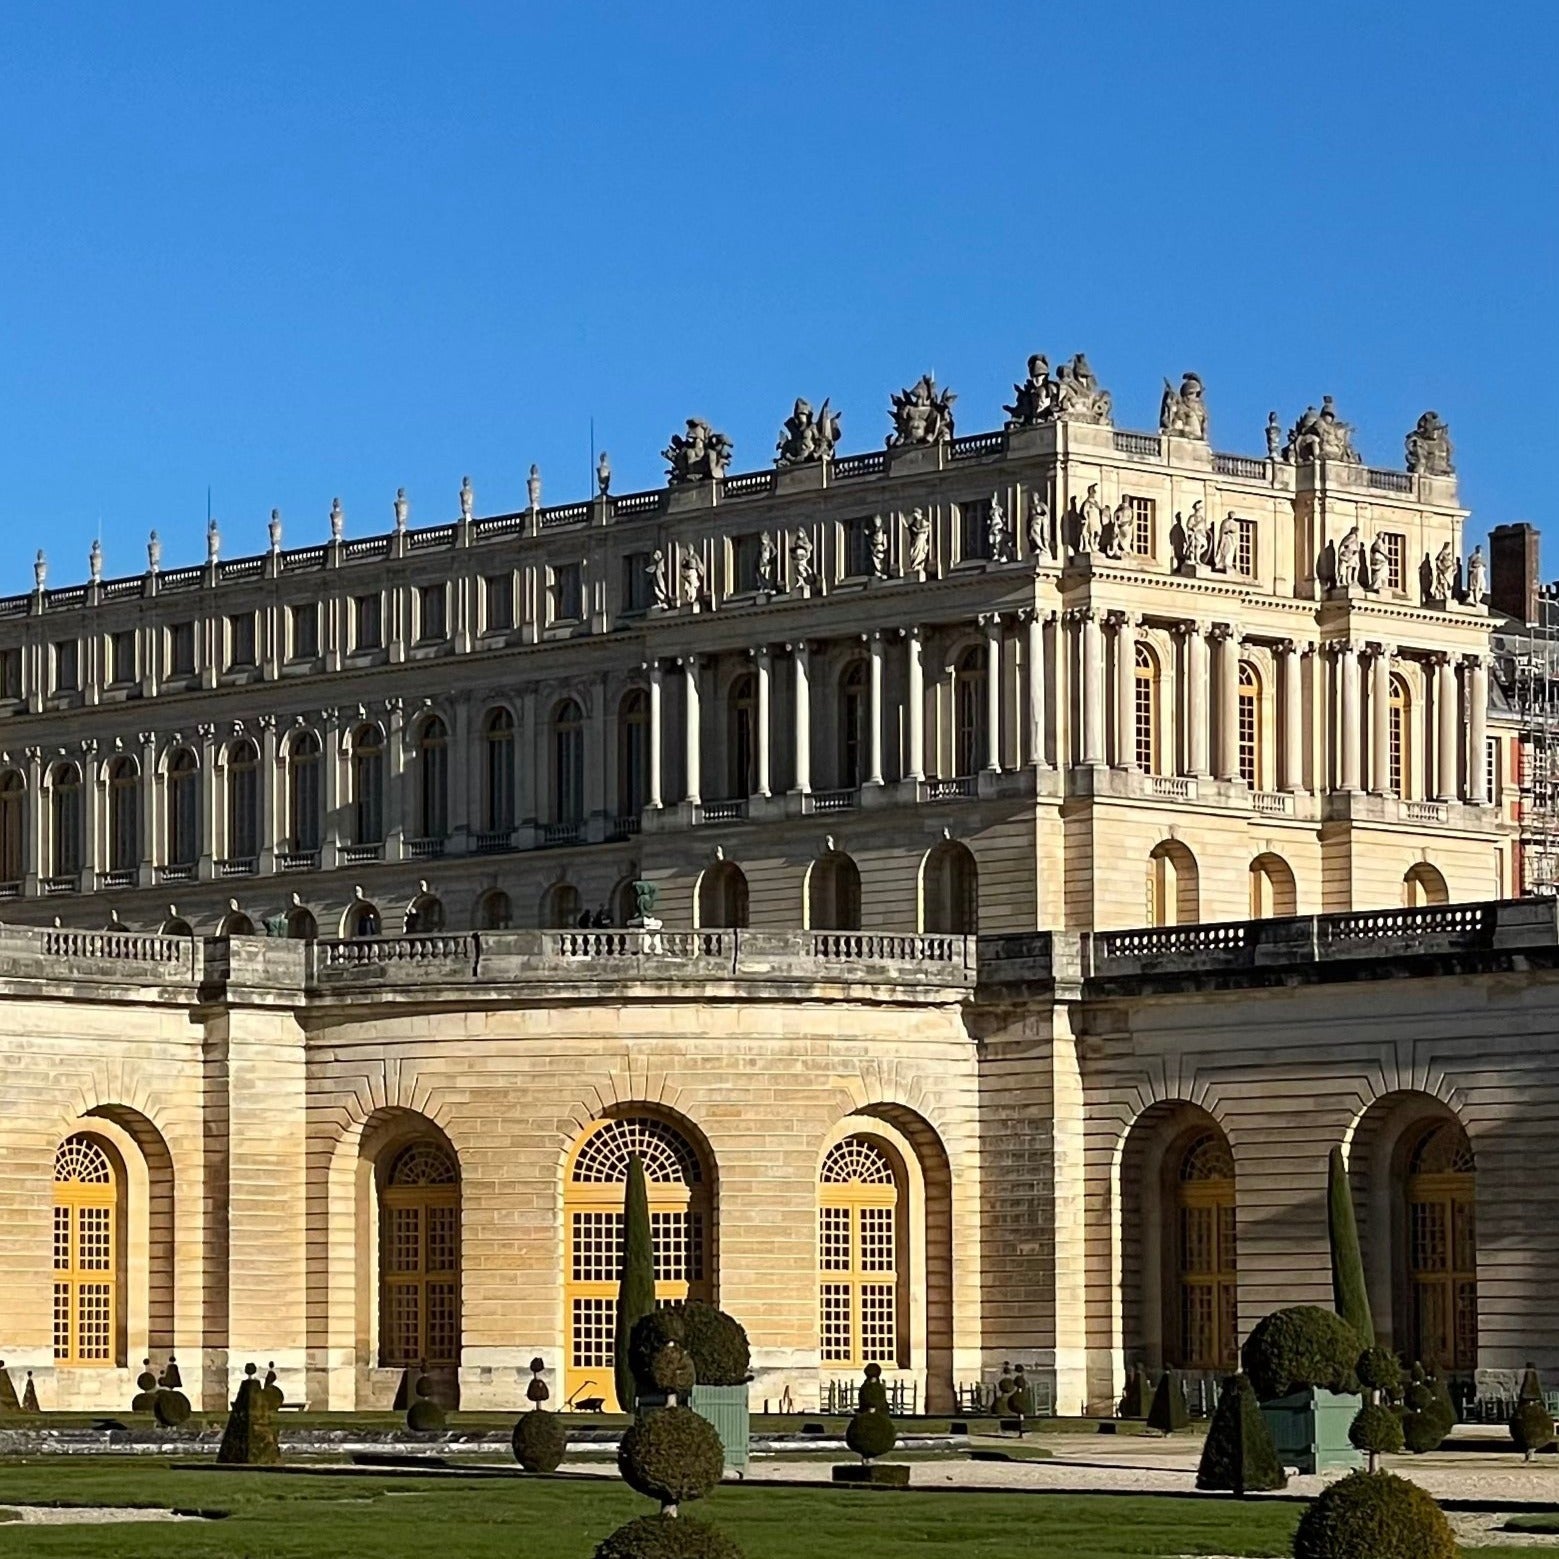 THE GRAND ORANGERY AT VERSAILLES